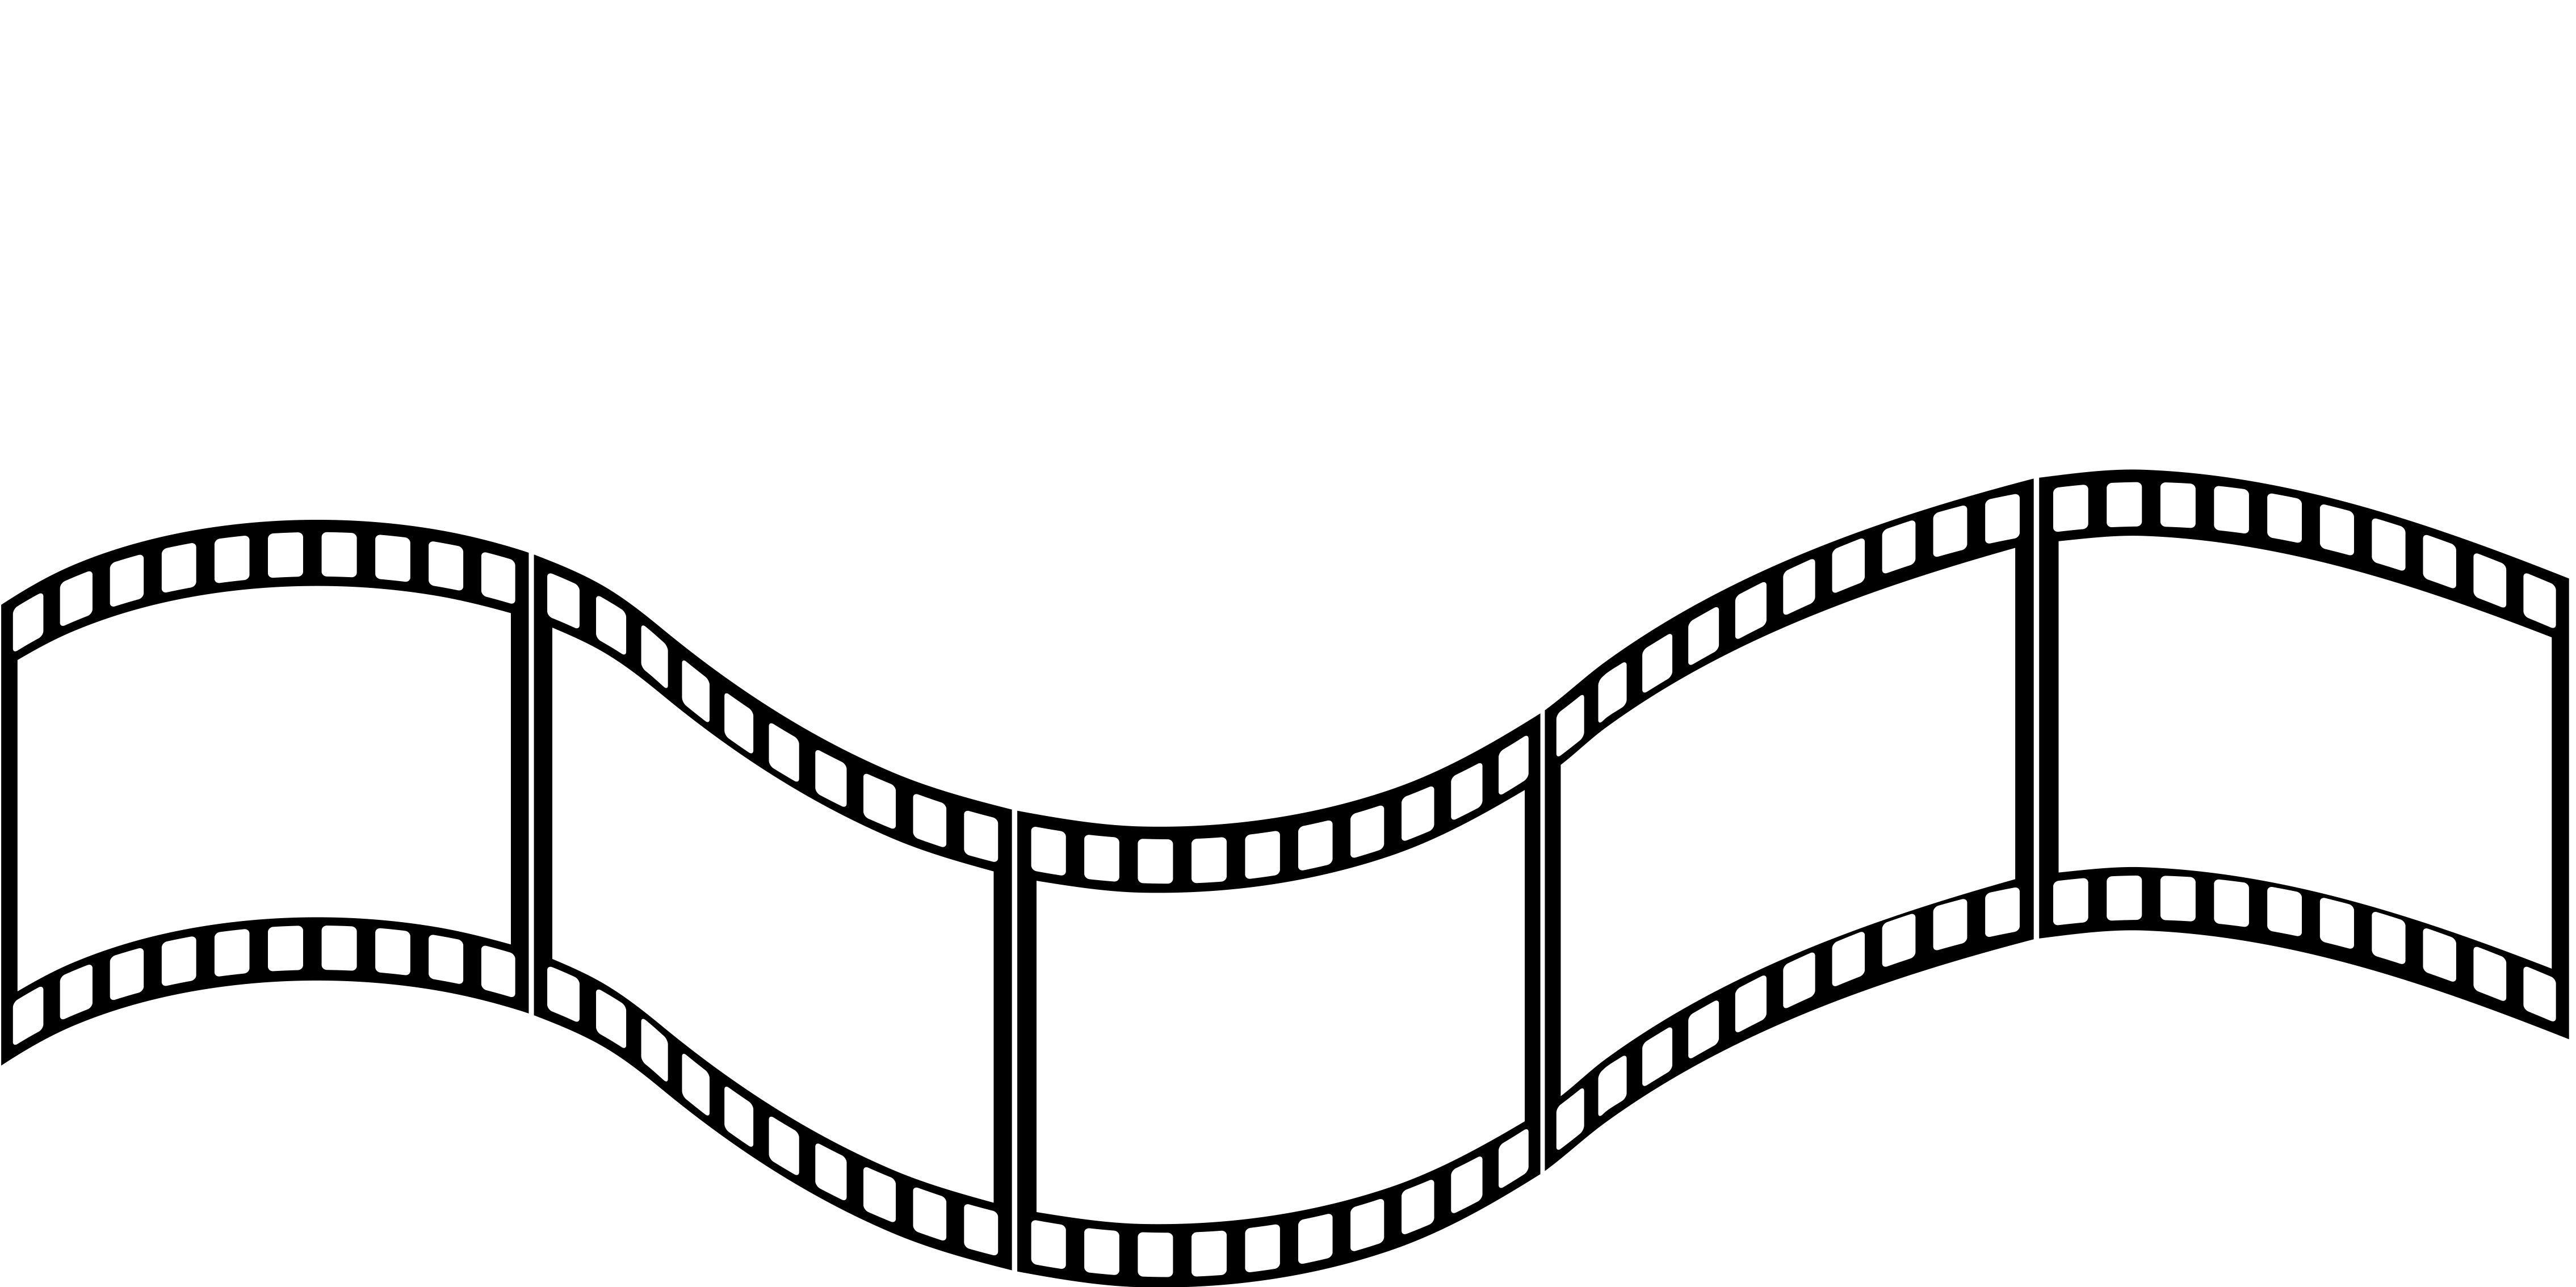 Film Reel Png Free Clipart That You Can Download To You Computer. Film strip, Movie reels, Film reels